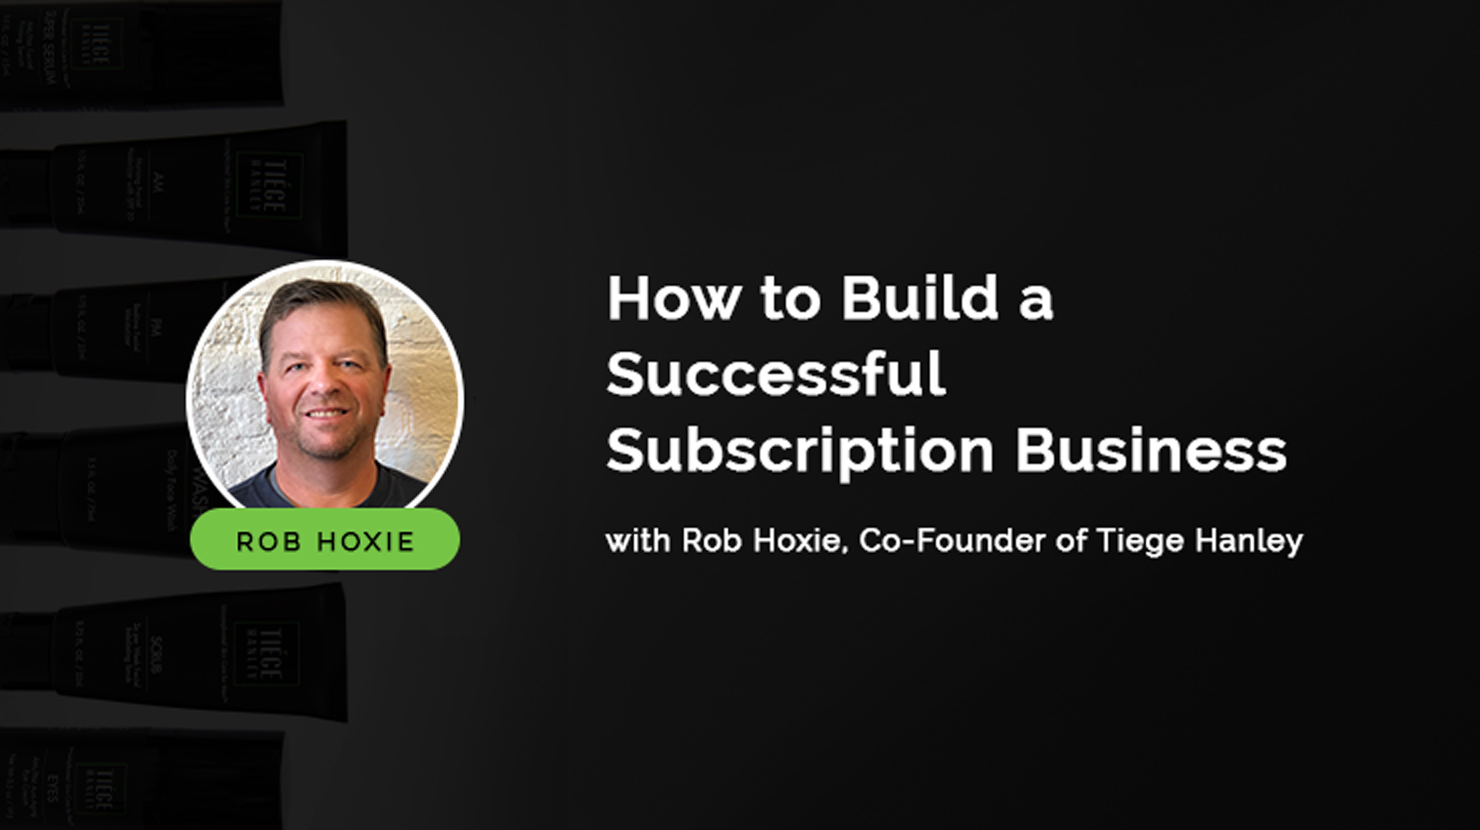 How to build a successful subscription business: An interview with Rob Hoxie, Co-Founder of Tiege Hanley